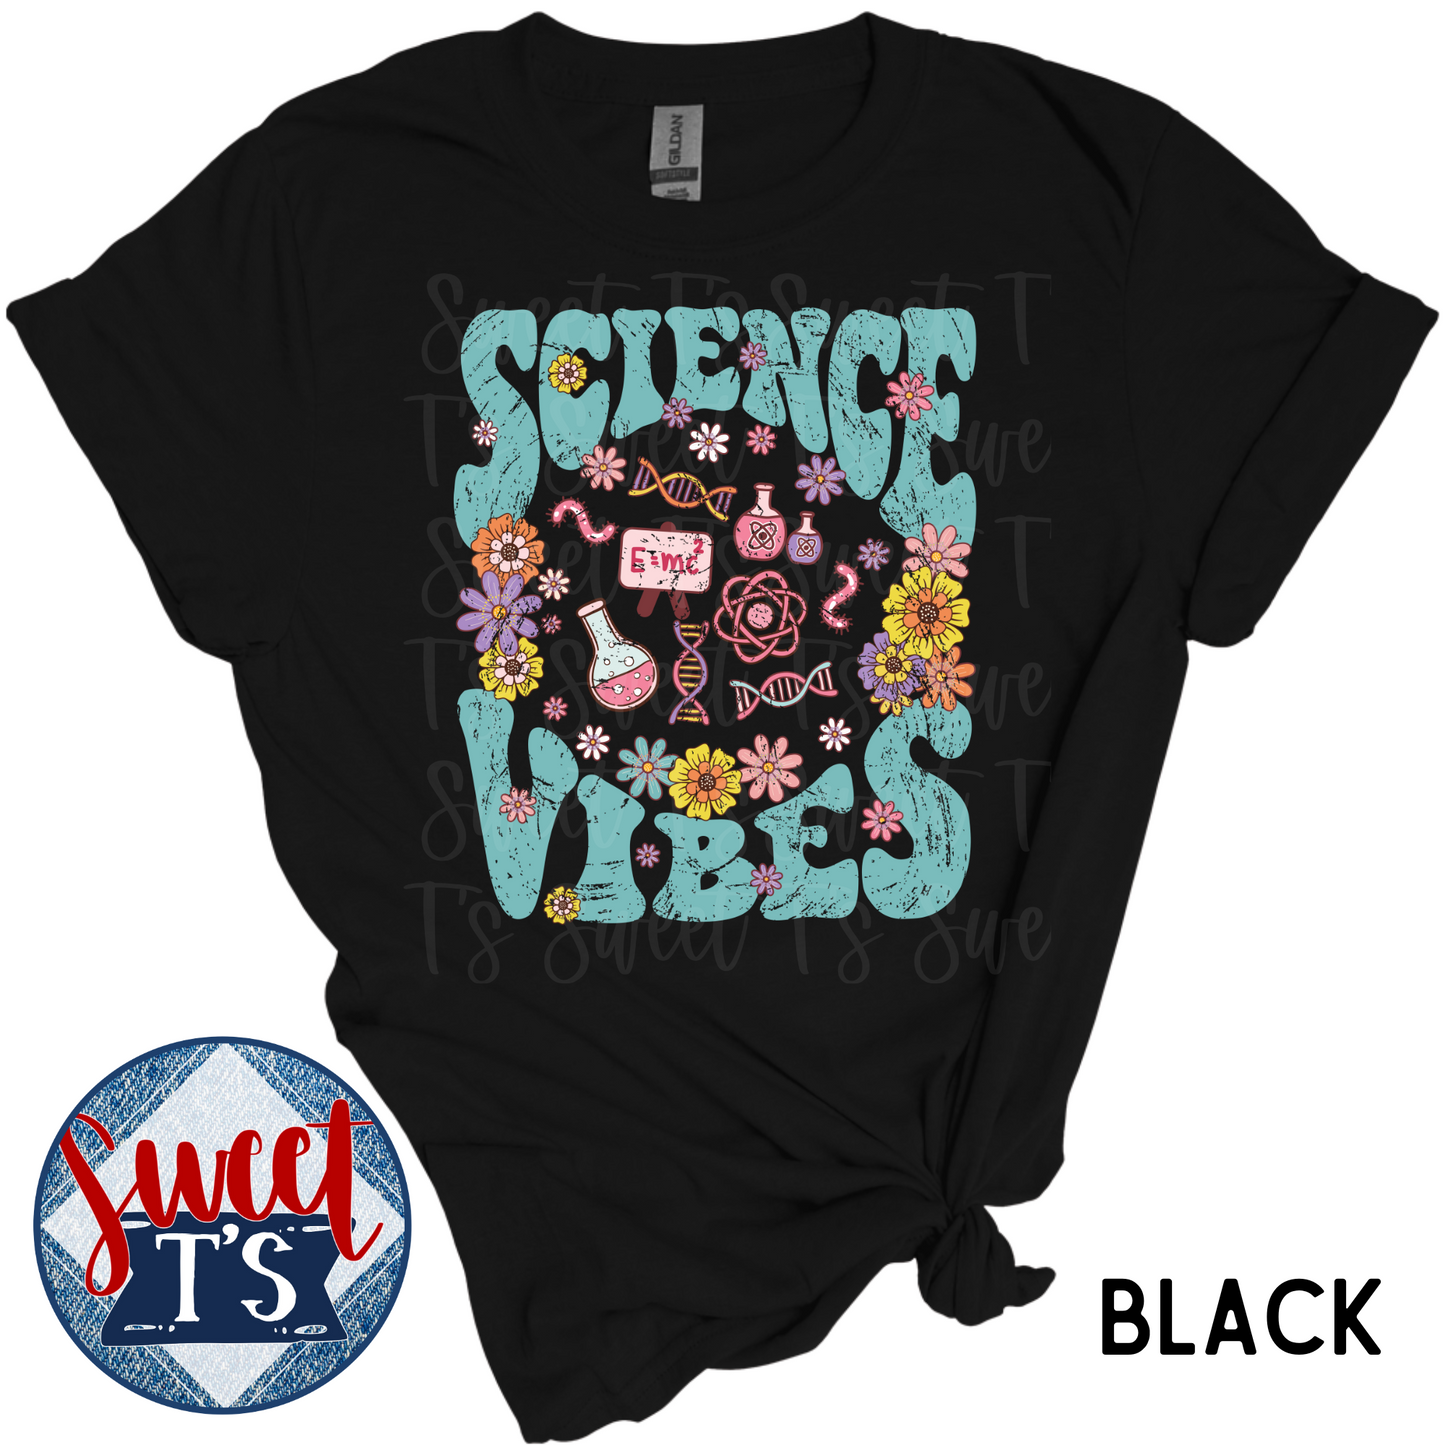 Science Vibes *Distressed Version*